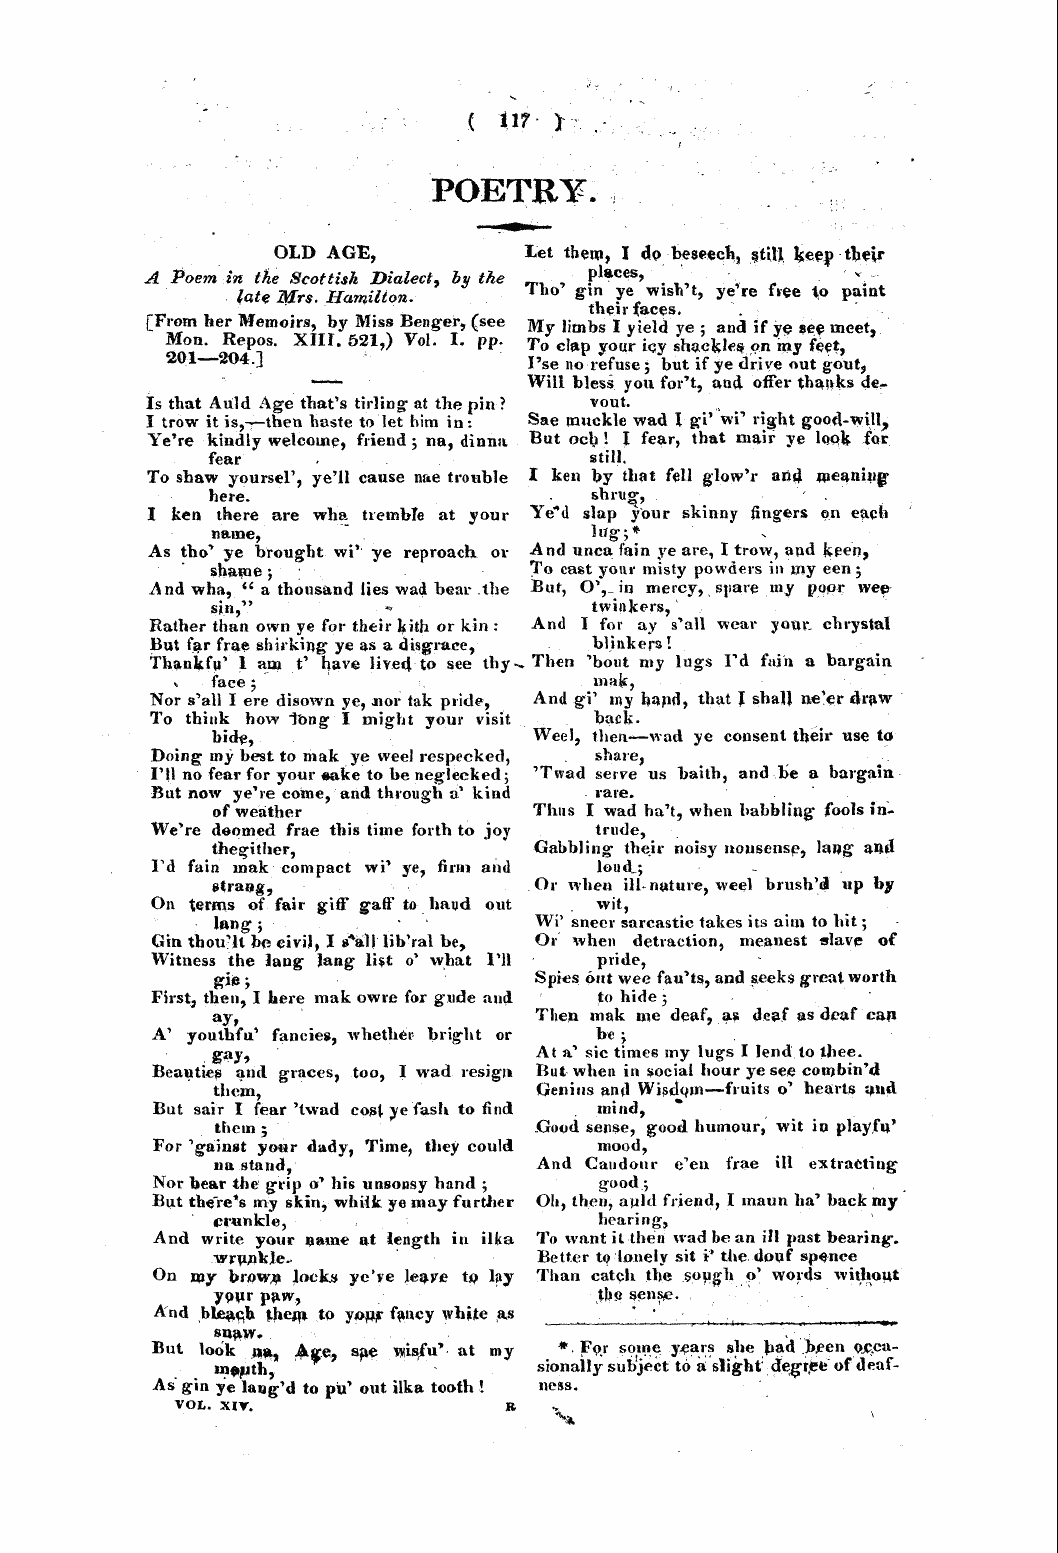 Monthly Repository (1806-1838) and Unitarian Chronicle (1832-1833): F Y, 1st edition, Supplement: 49